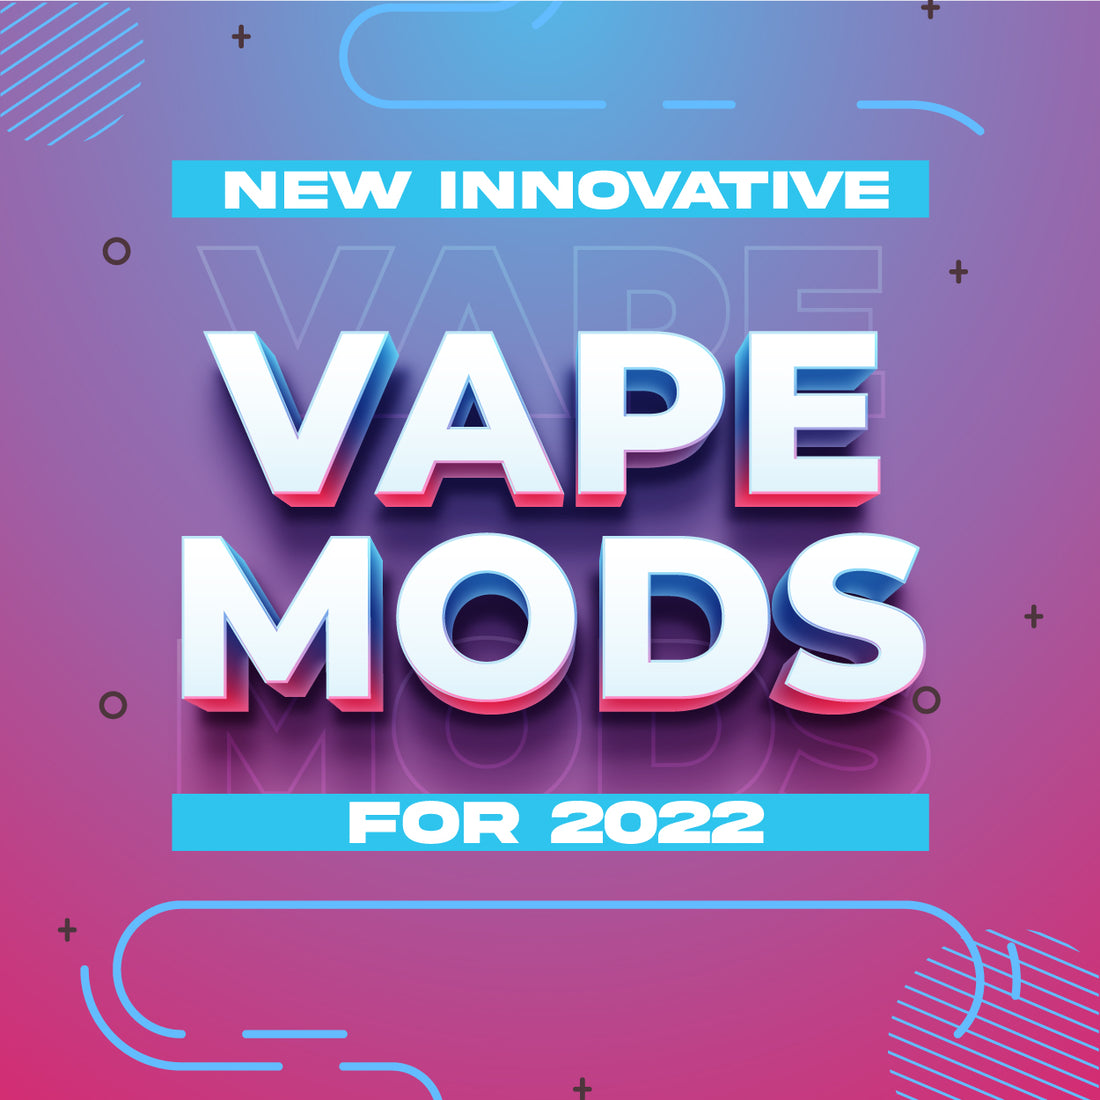 New and Innovative Vape Mods for 2022